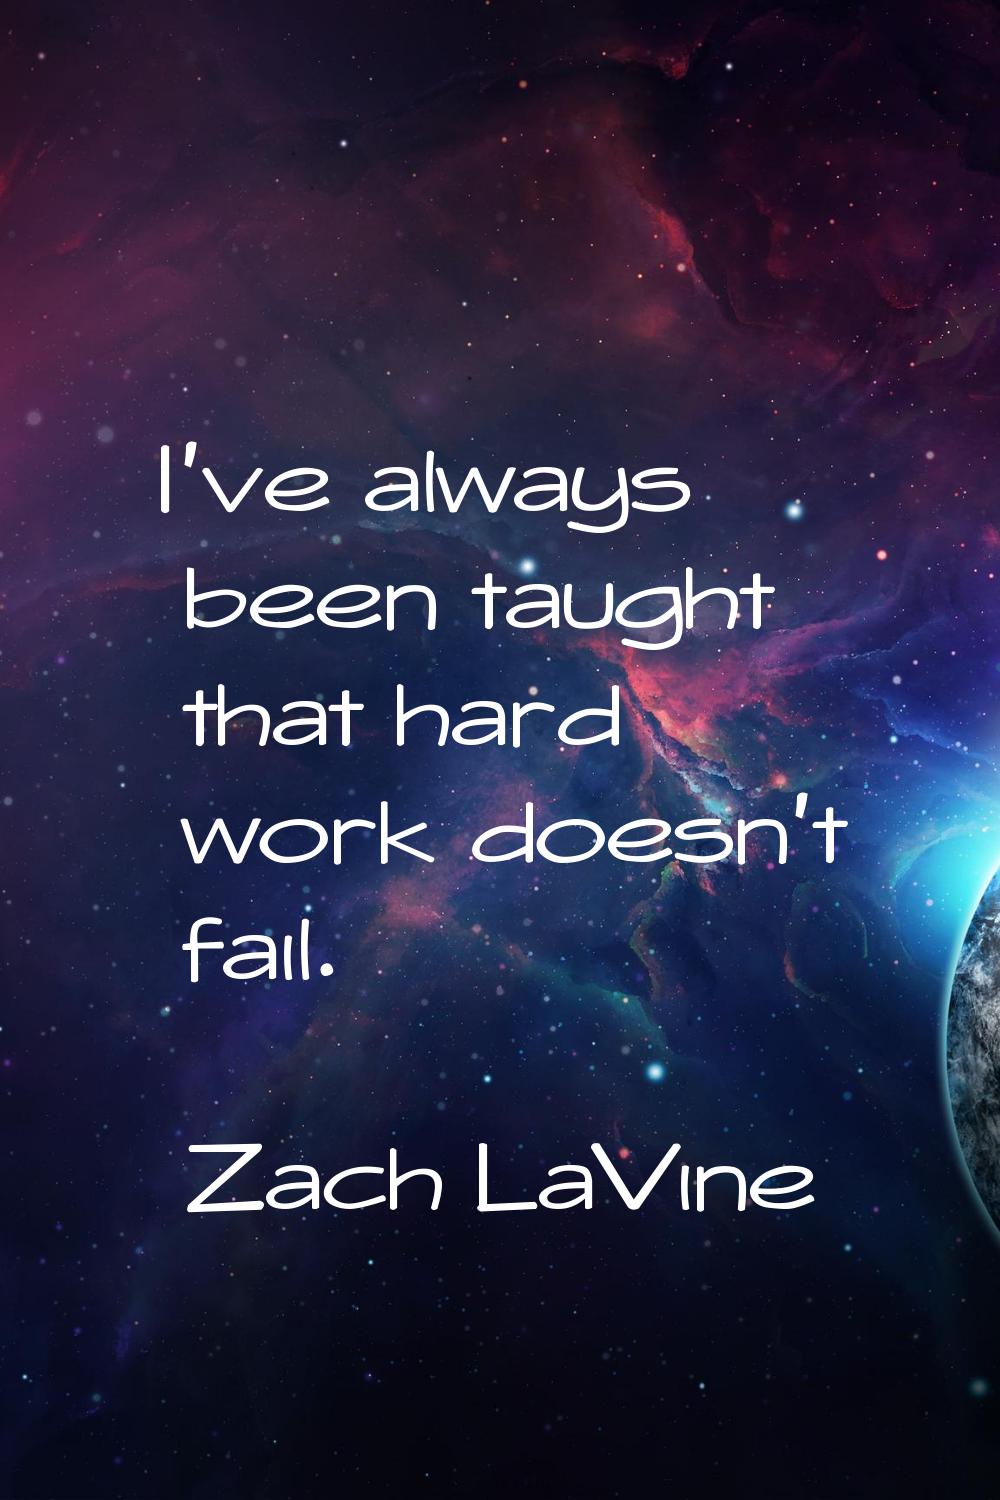 I've always been taught that hard work doesn't fail.